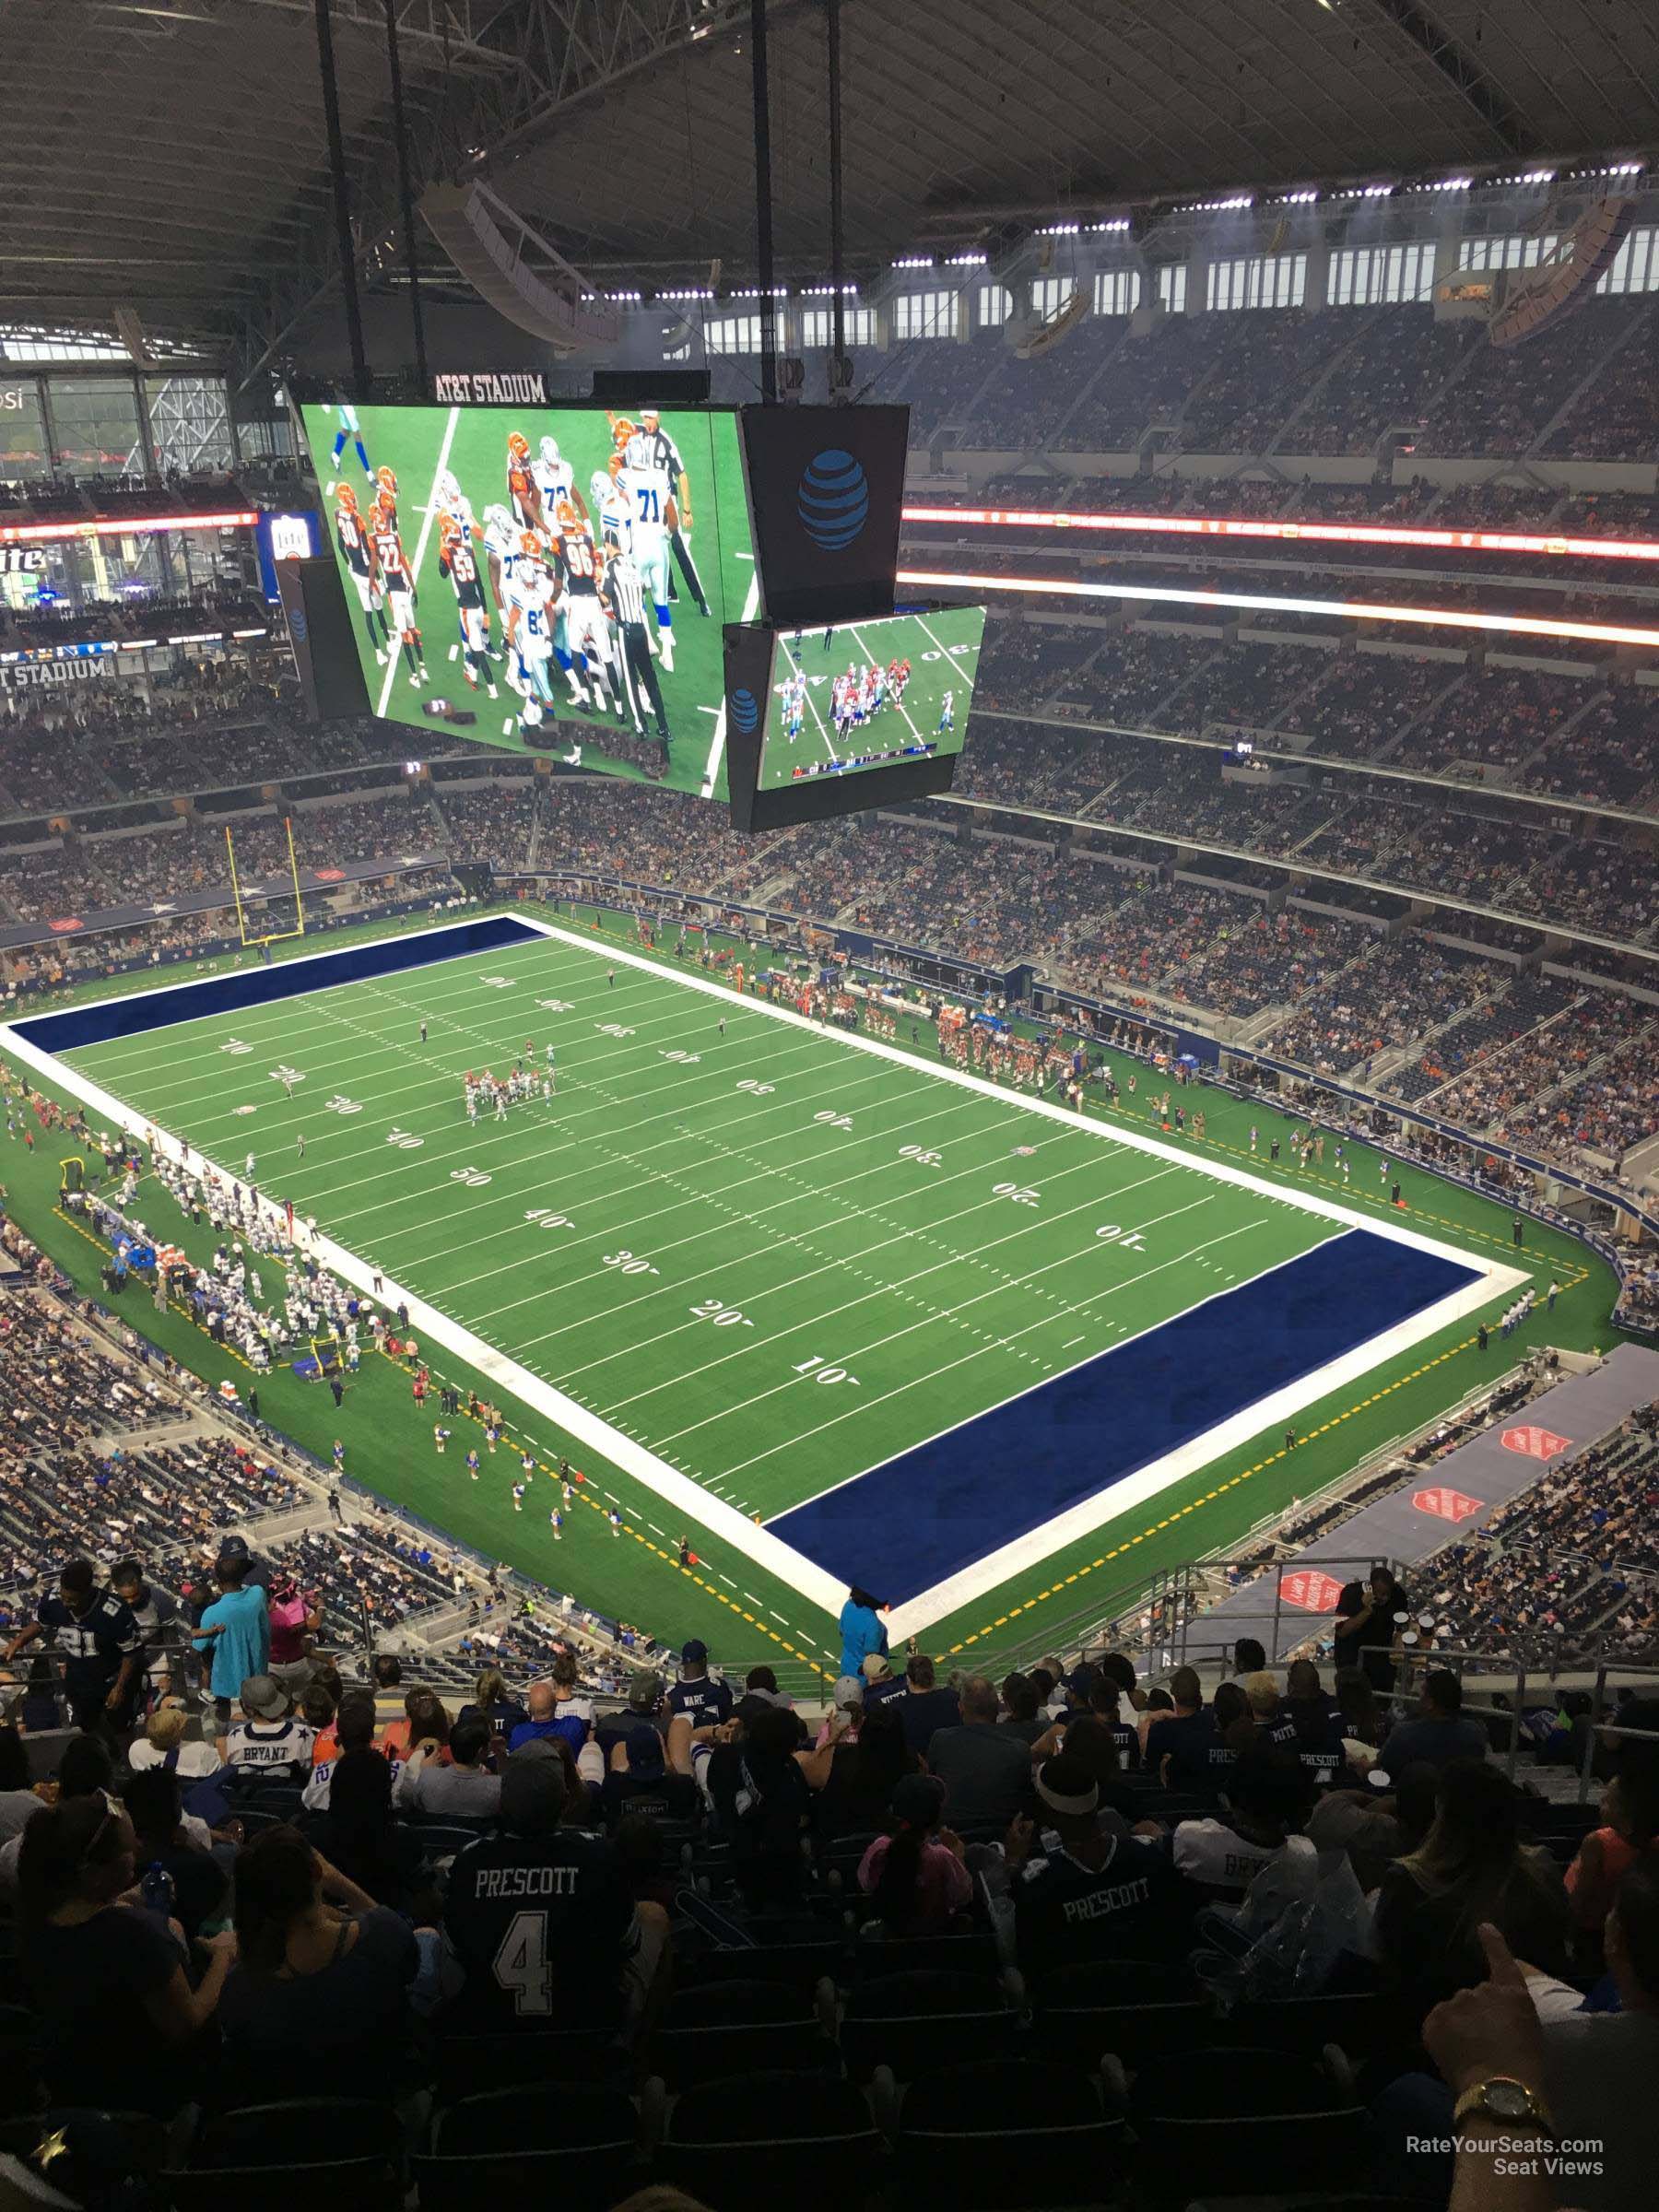 section 404, row 22 seat view  for football - at&t stadium (cowboys stadium)